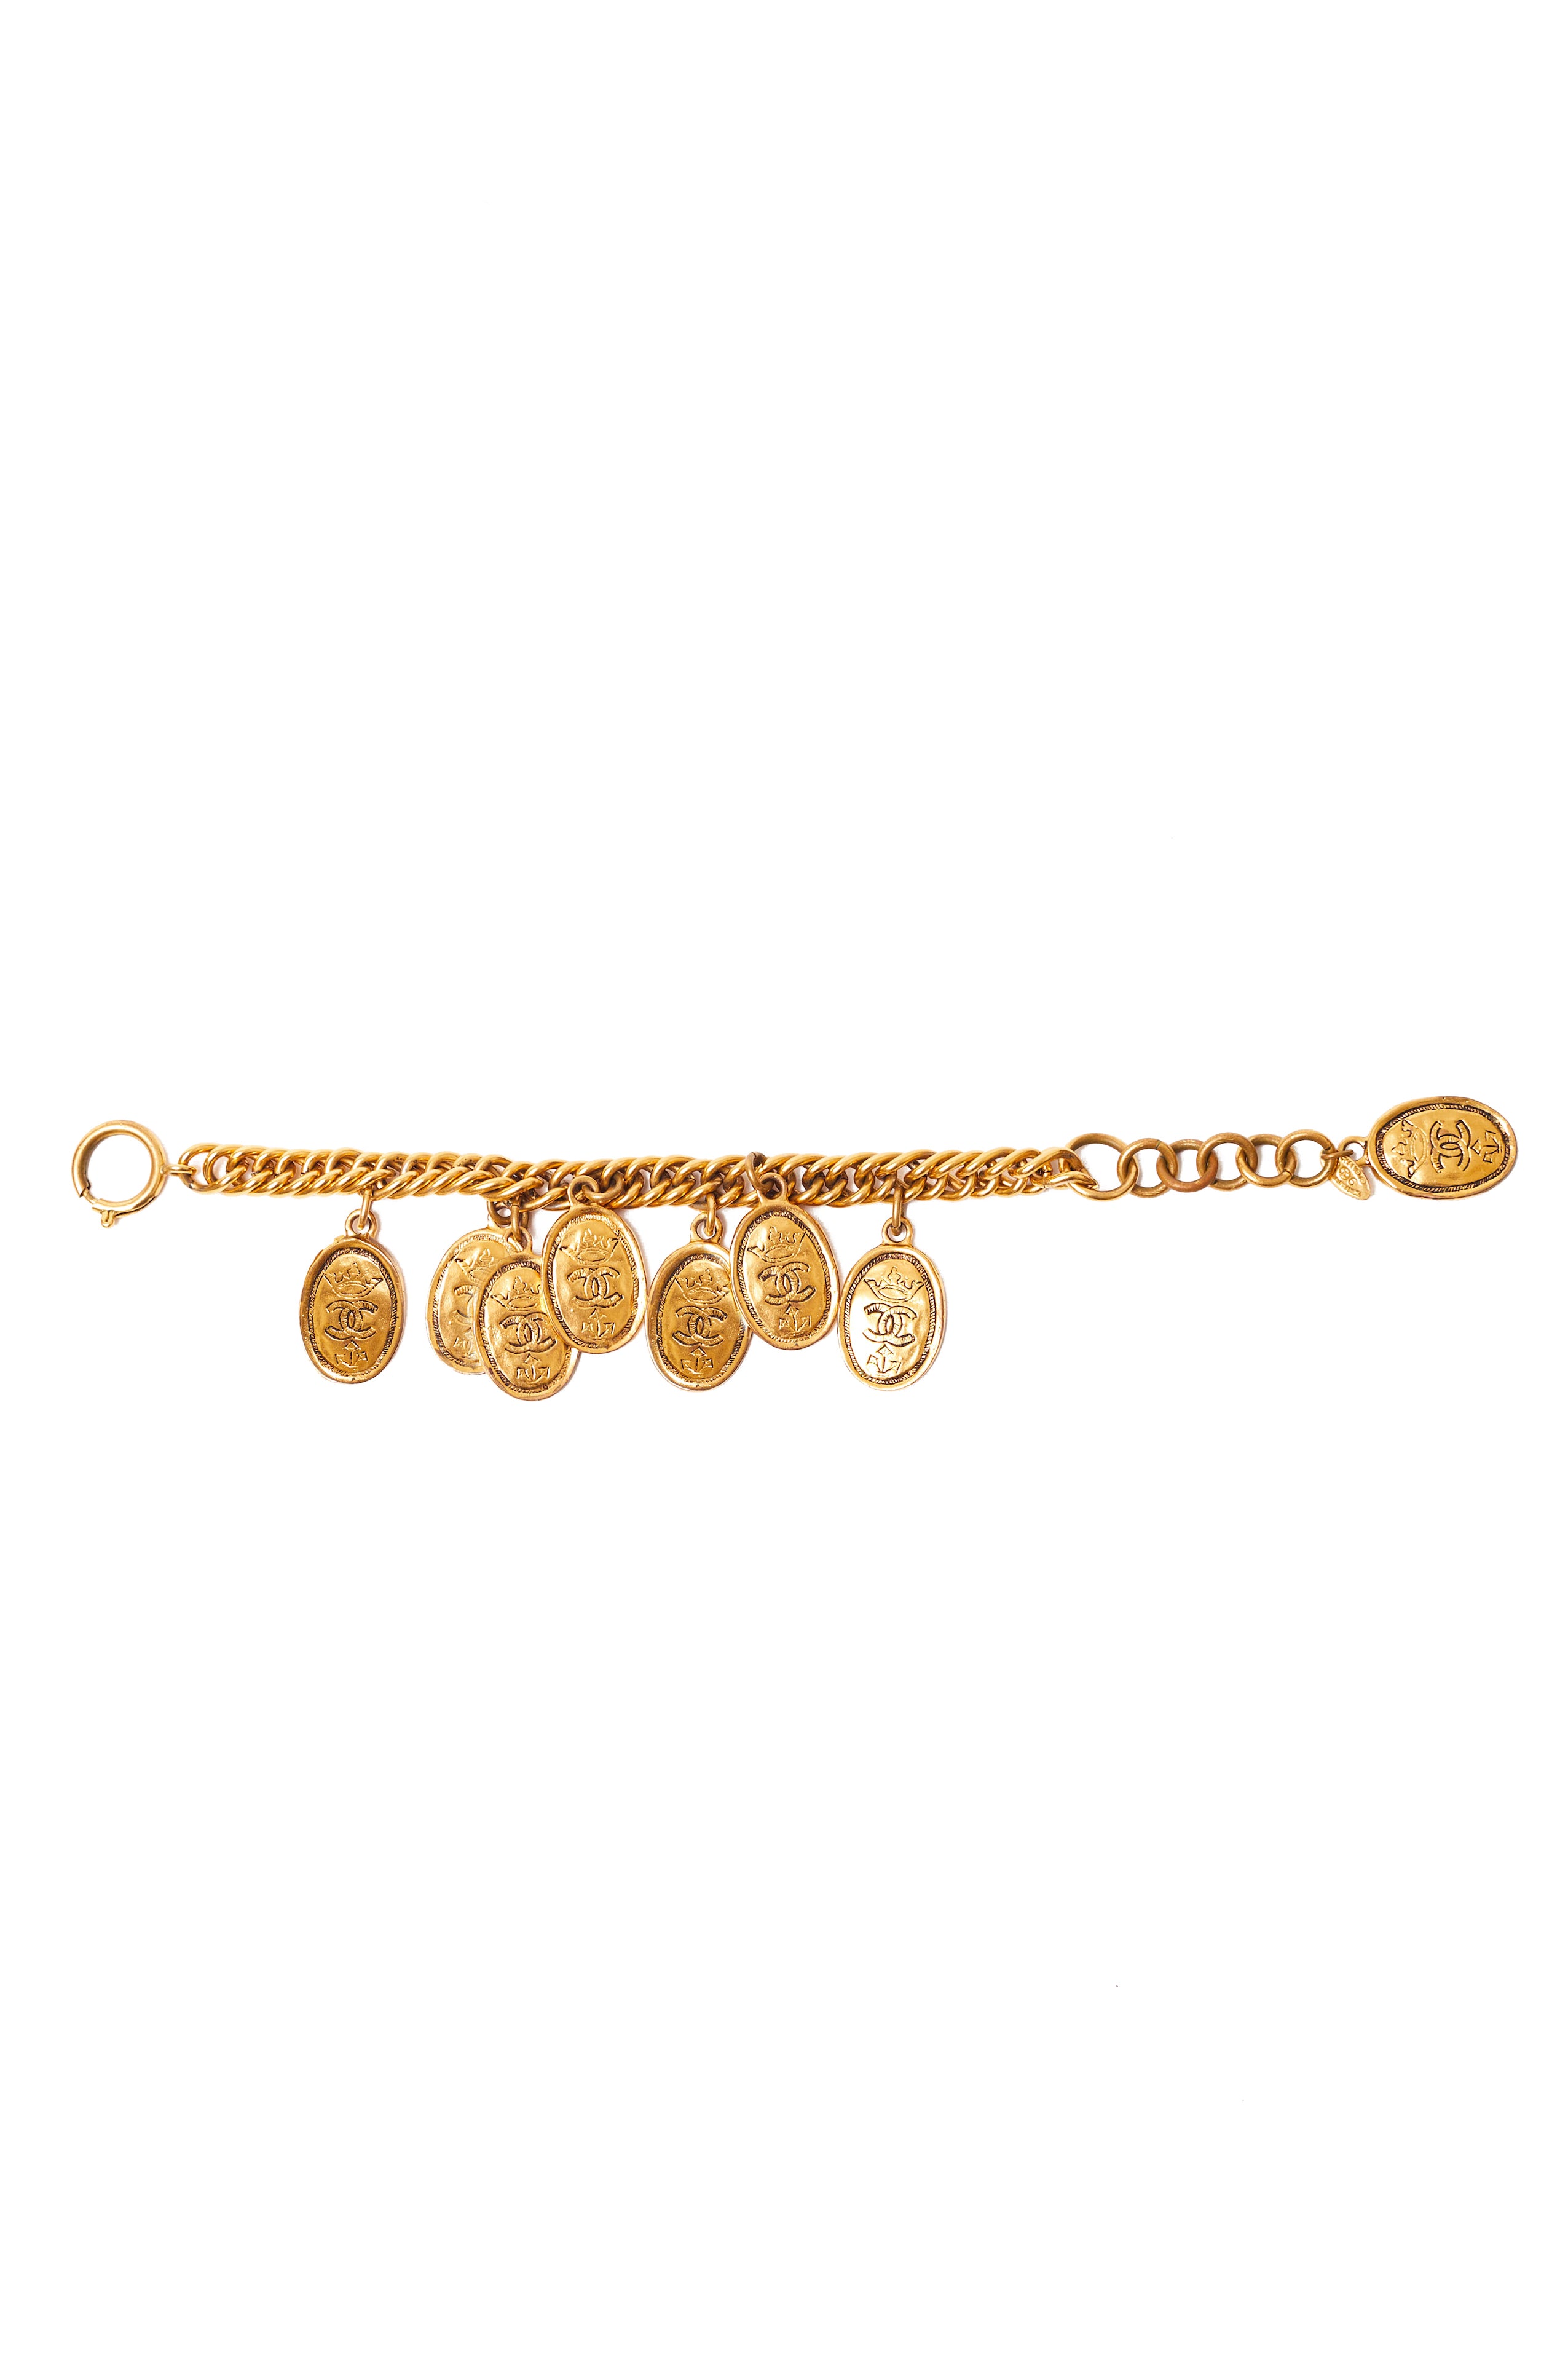 Chanel <br> 1980's gold plated CC crown logo coin charm bracelet